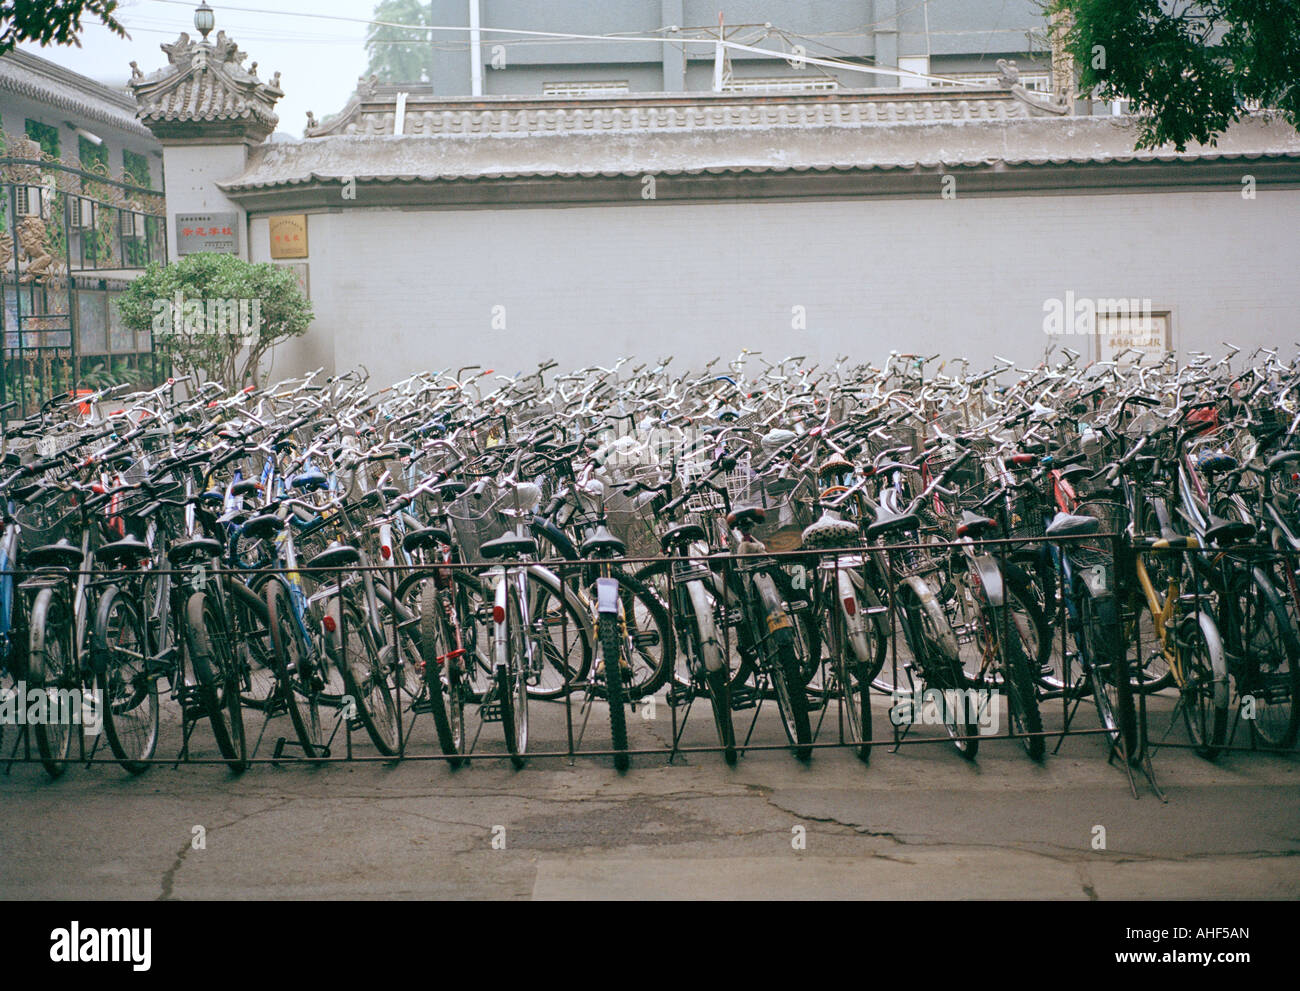 Modern Lifestyle. Bike parking in the city of Beijing in China in Asia.  Adventure Culture Travel Far East World Cities Stock Photo - Alamy